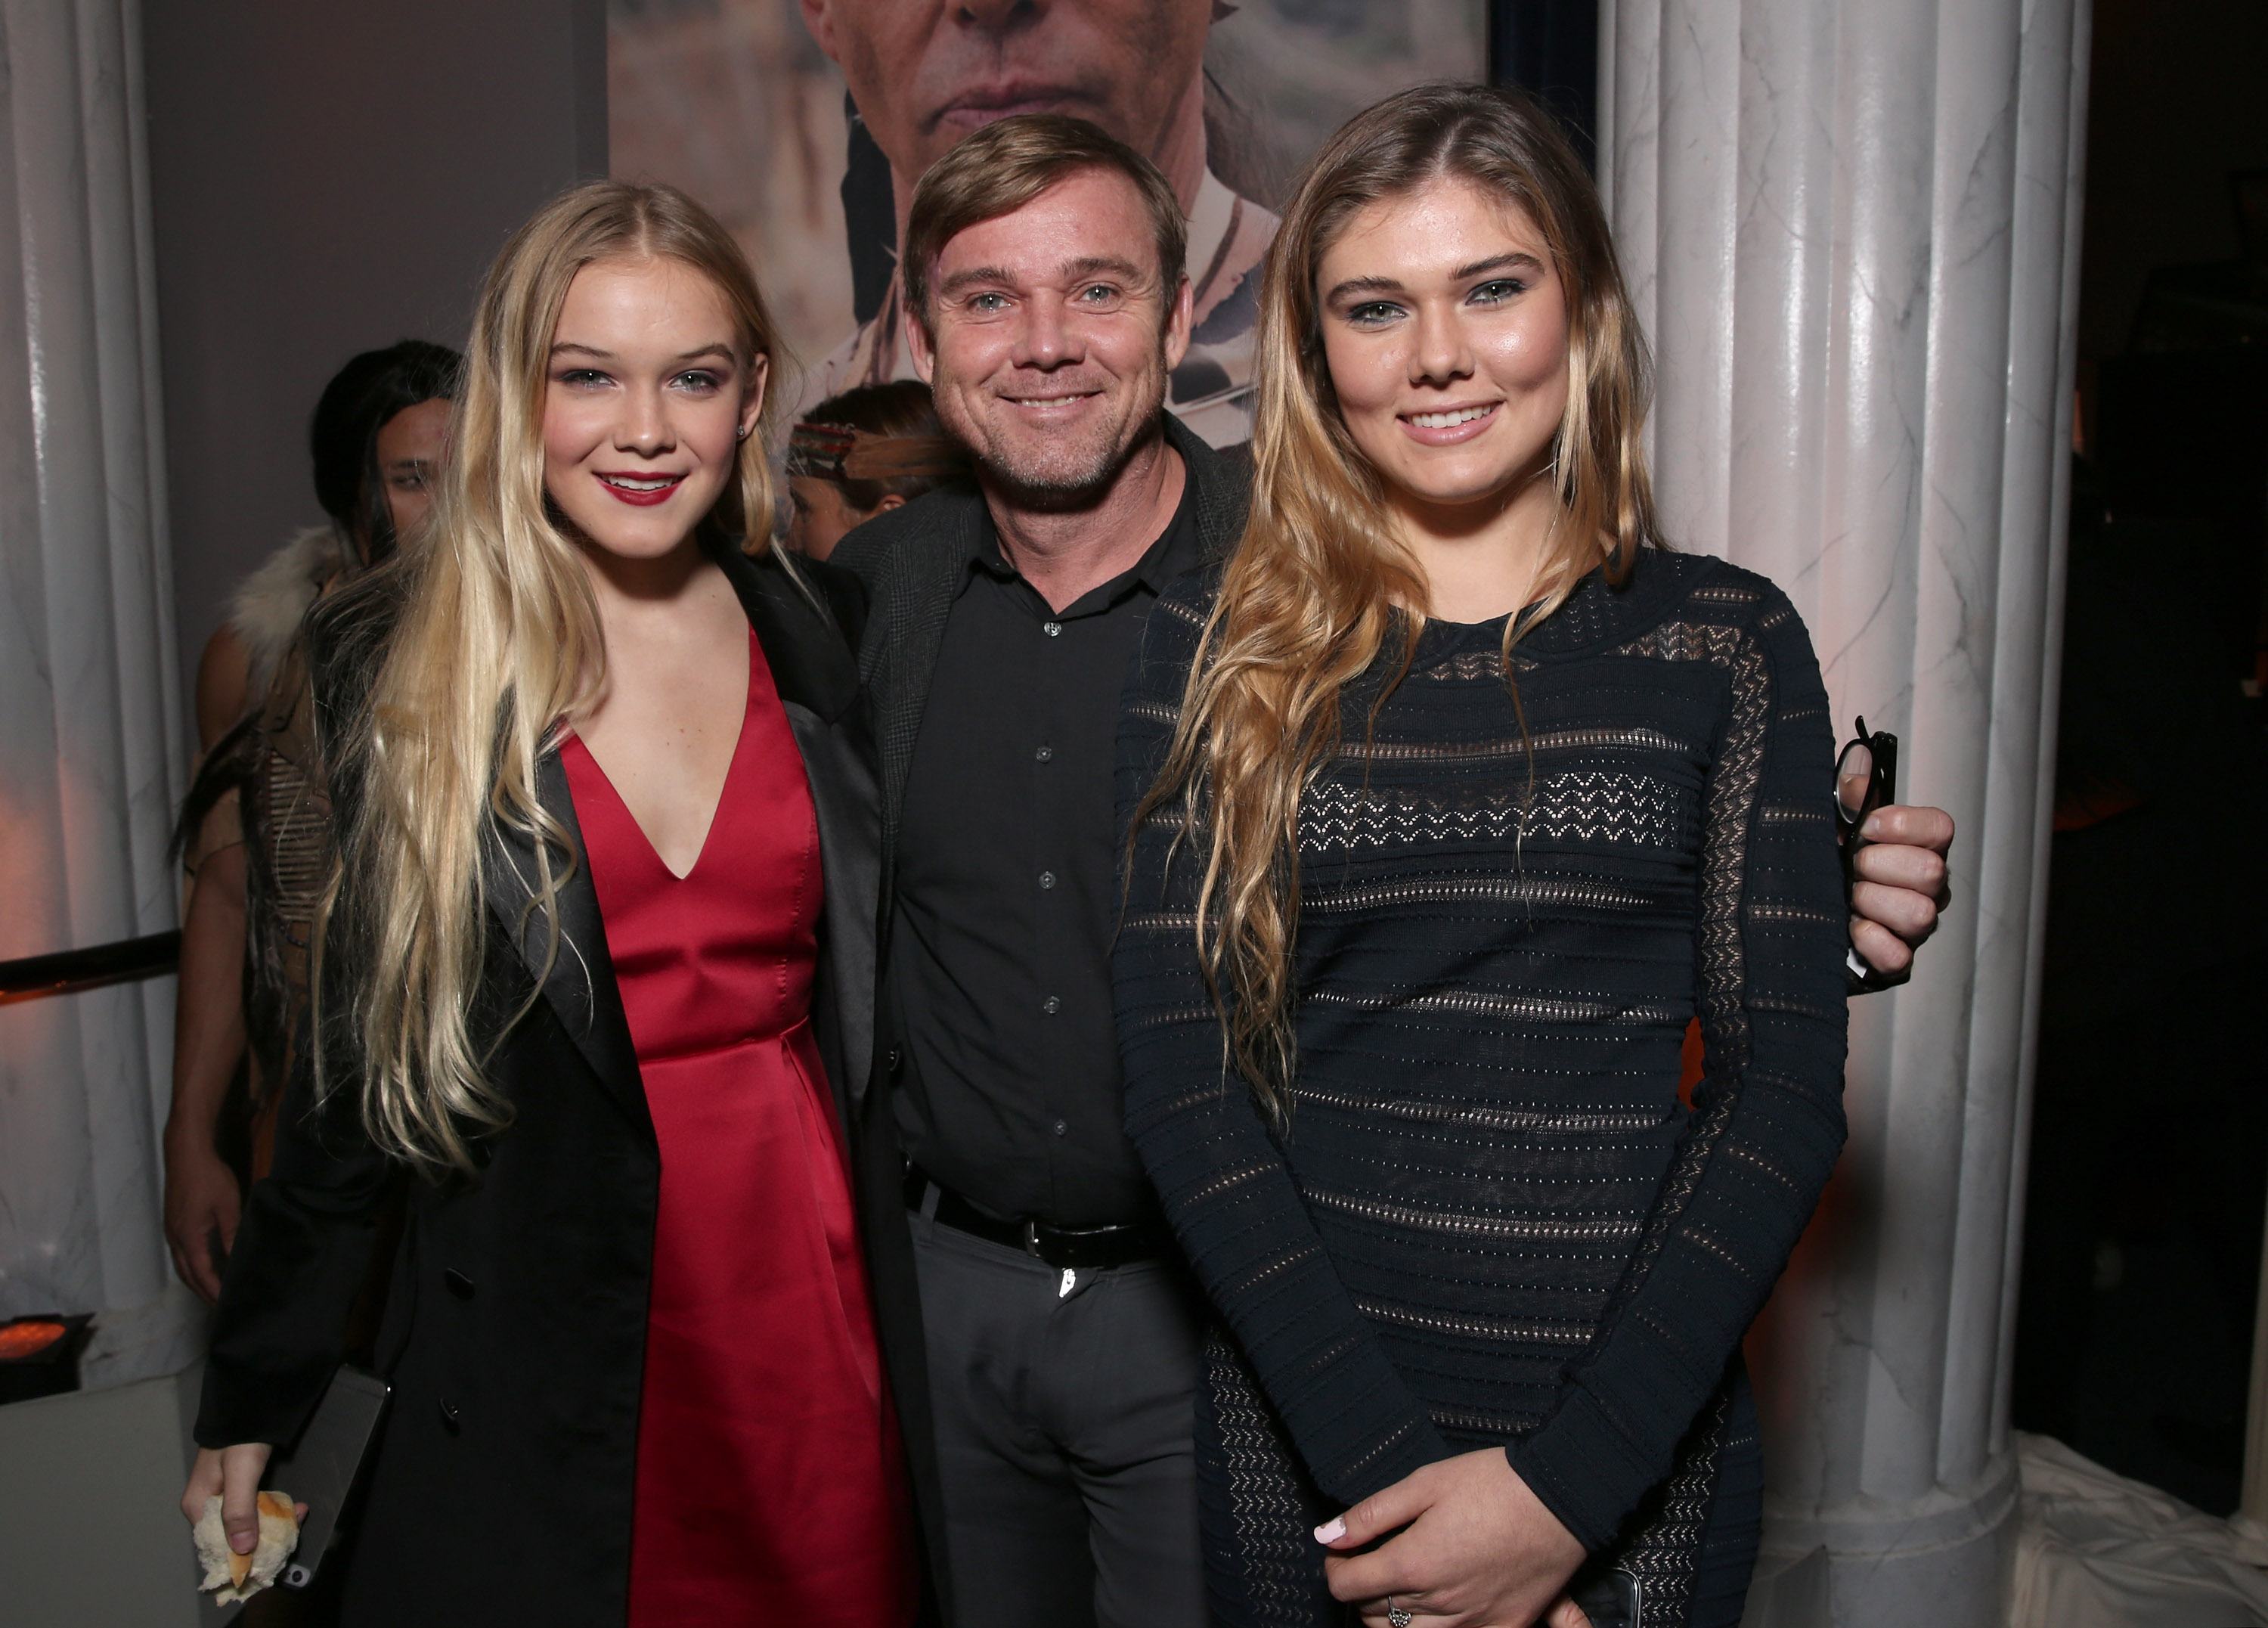 Ricky Schroder, Faith Schroder, and Cambrie Schroder on November 9, 2015 in Beverly Hills, California | Source: Getty Images